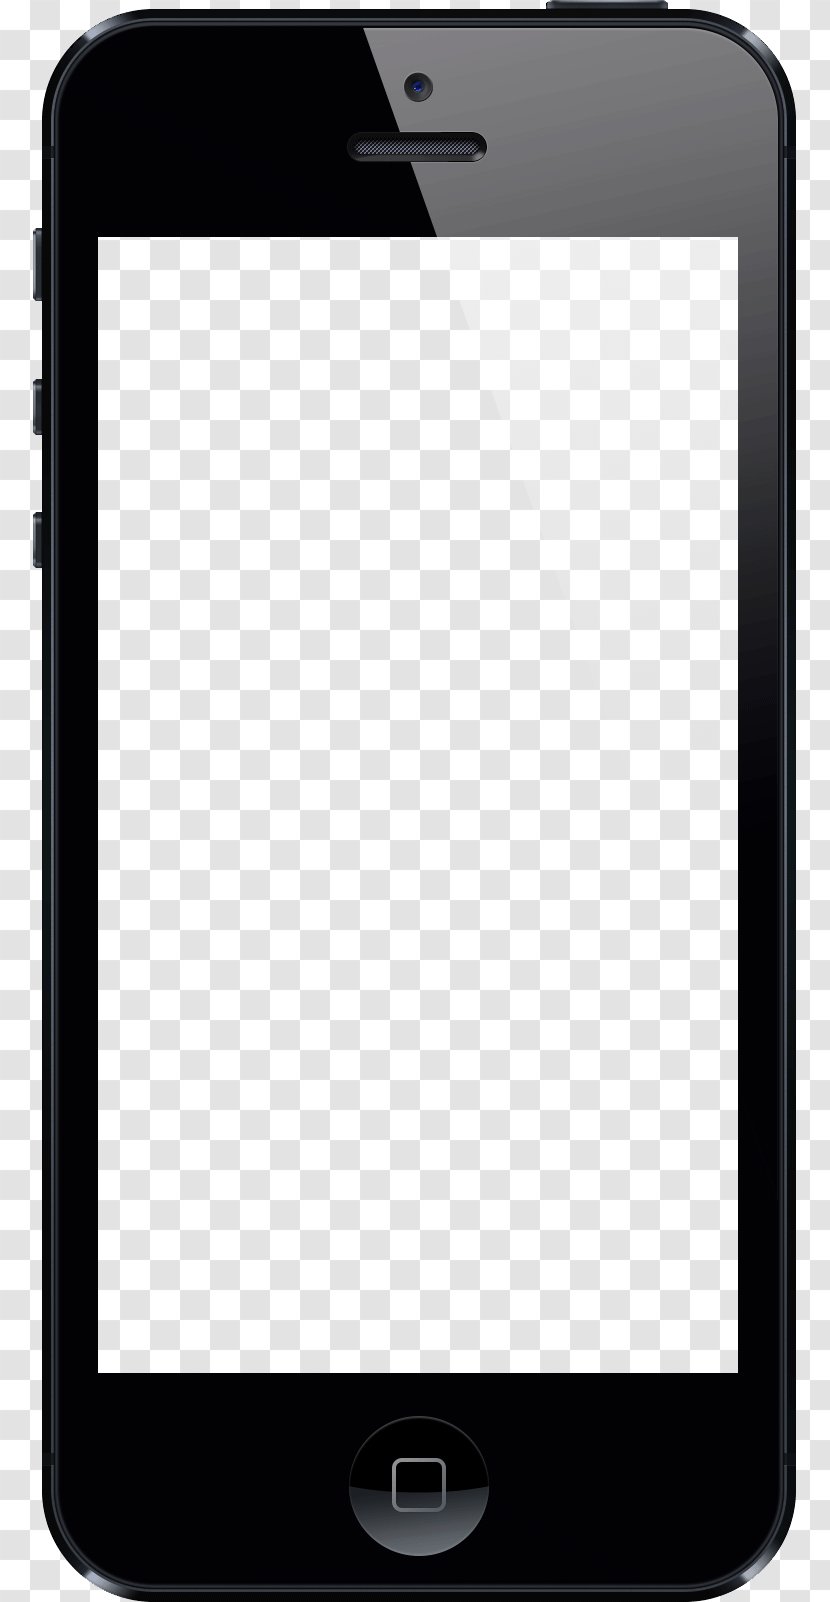 IPhone 5s 7 Plus 6 - Telephony - Smartphone Transparent PNG